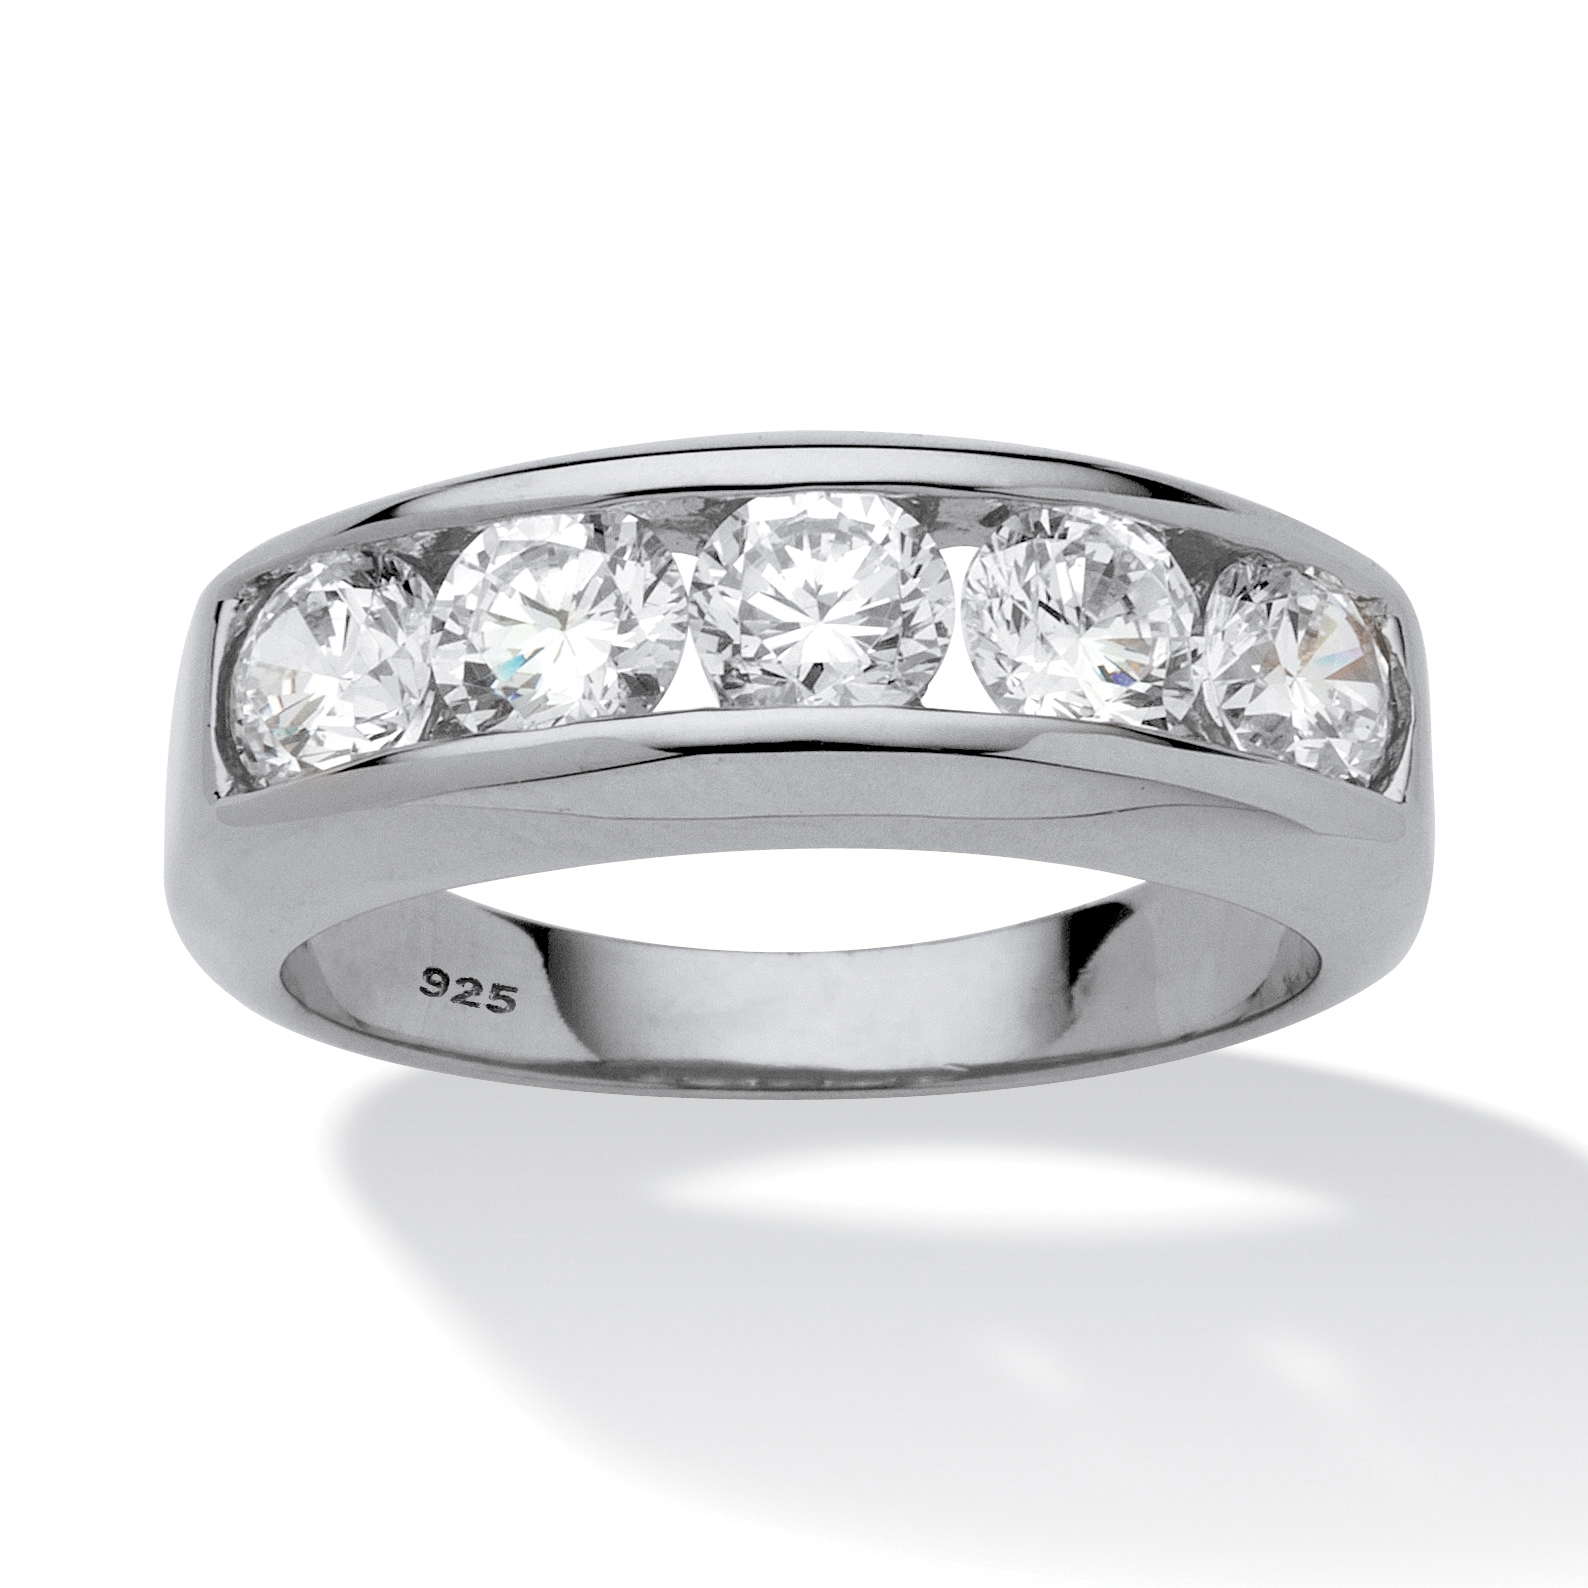 PalmBeach Jewelry Men's 2.50 TCW Round Cubic Zirconia Ring in Platinum-plated Sterling Silver